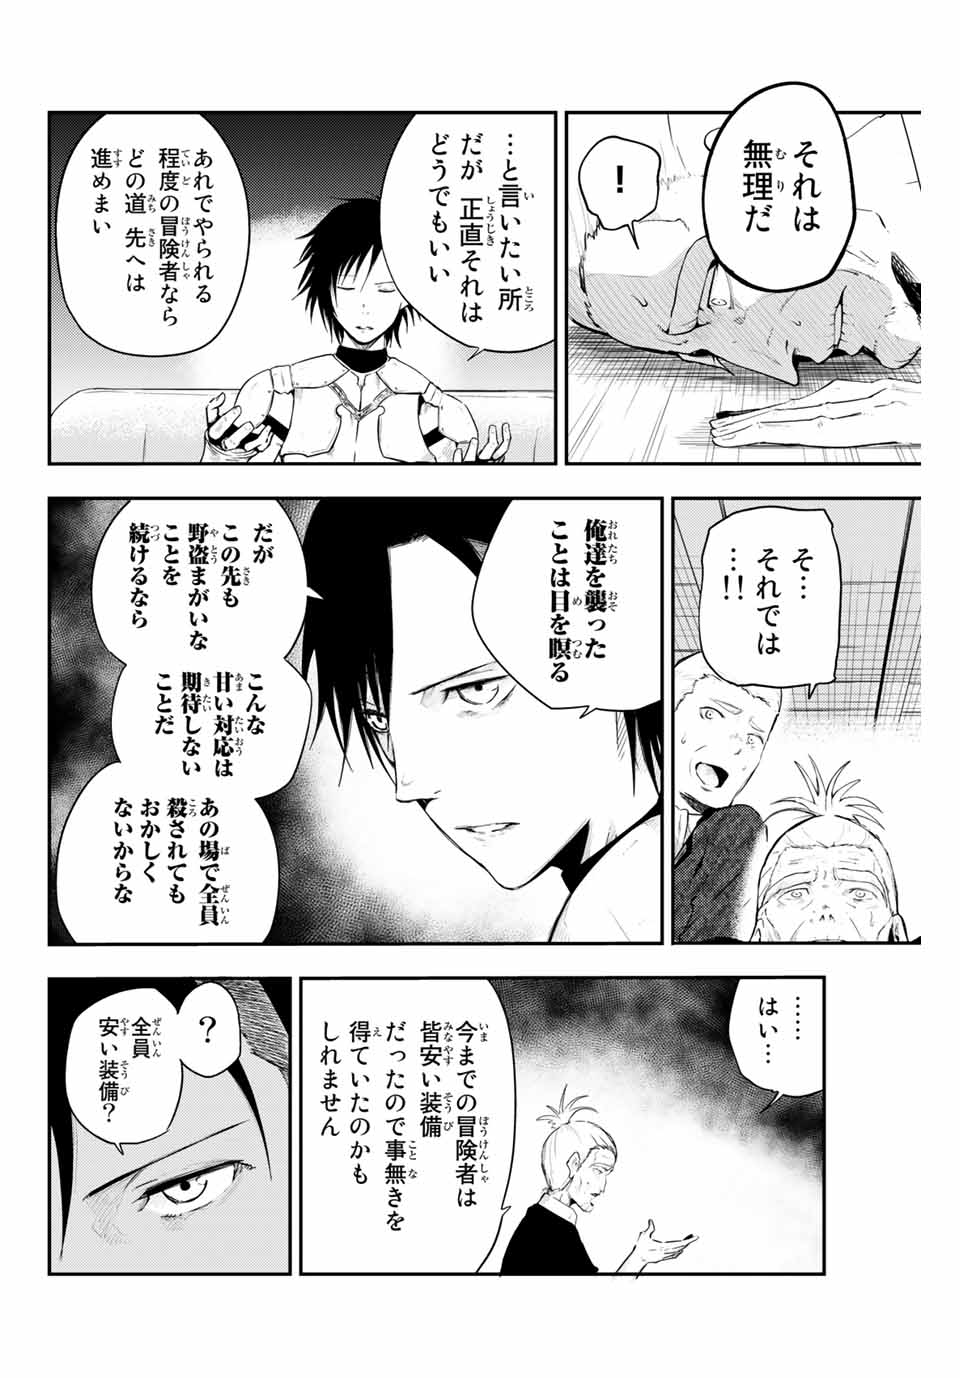 the strongest former prince-; 奴隷転生 ～その奴隷、最強の元王子につき～ 第6話 - Page 6